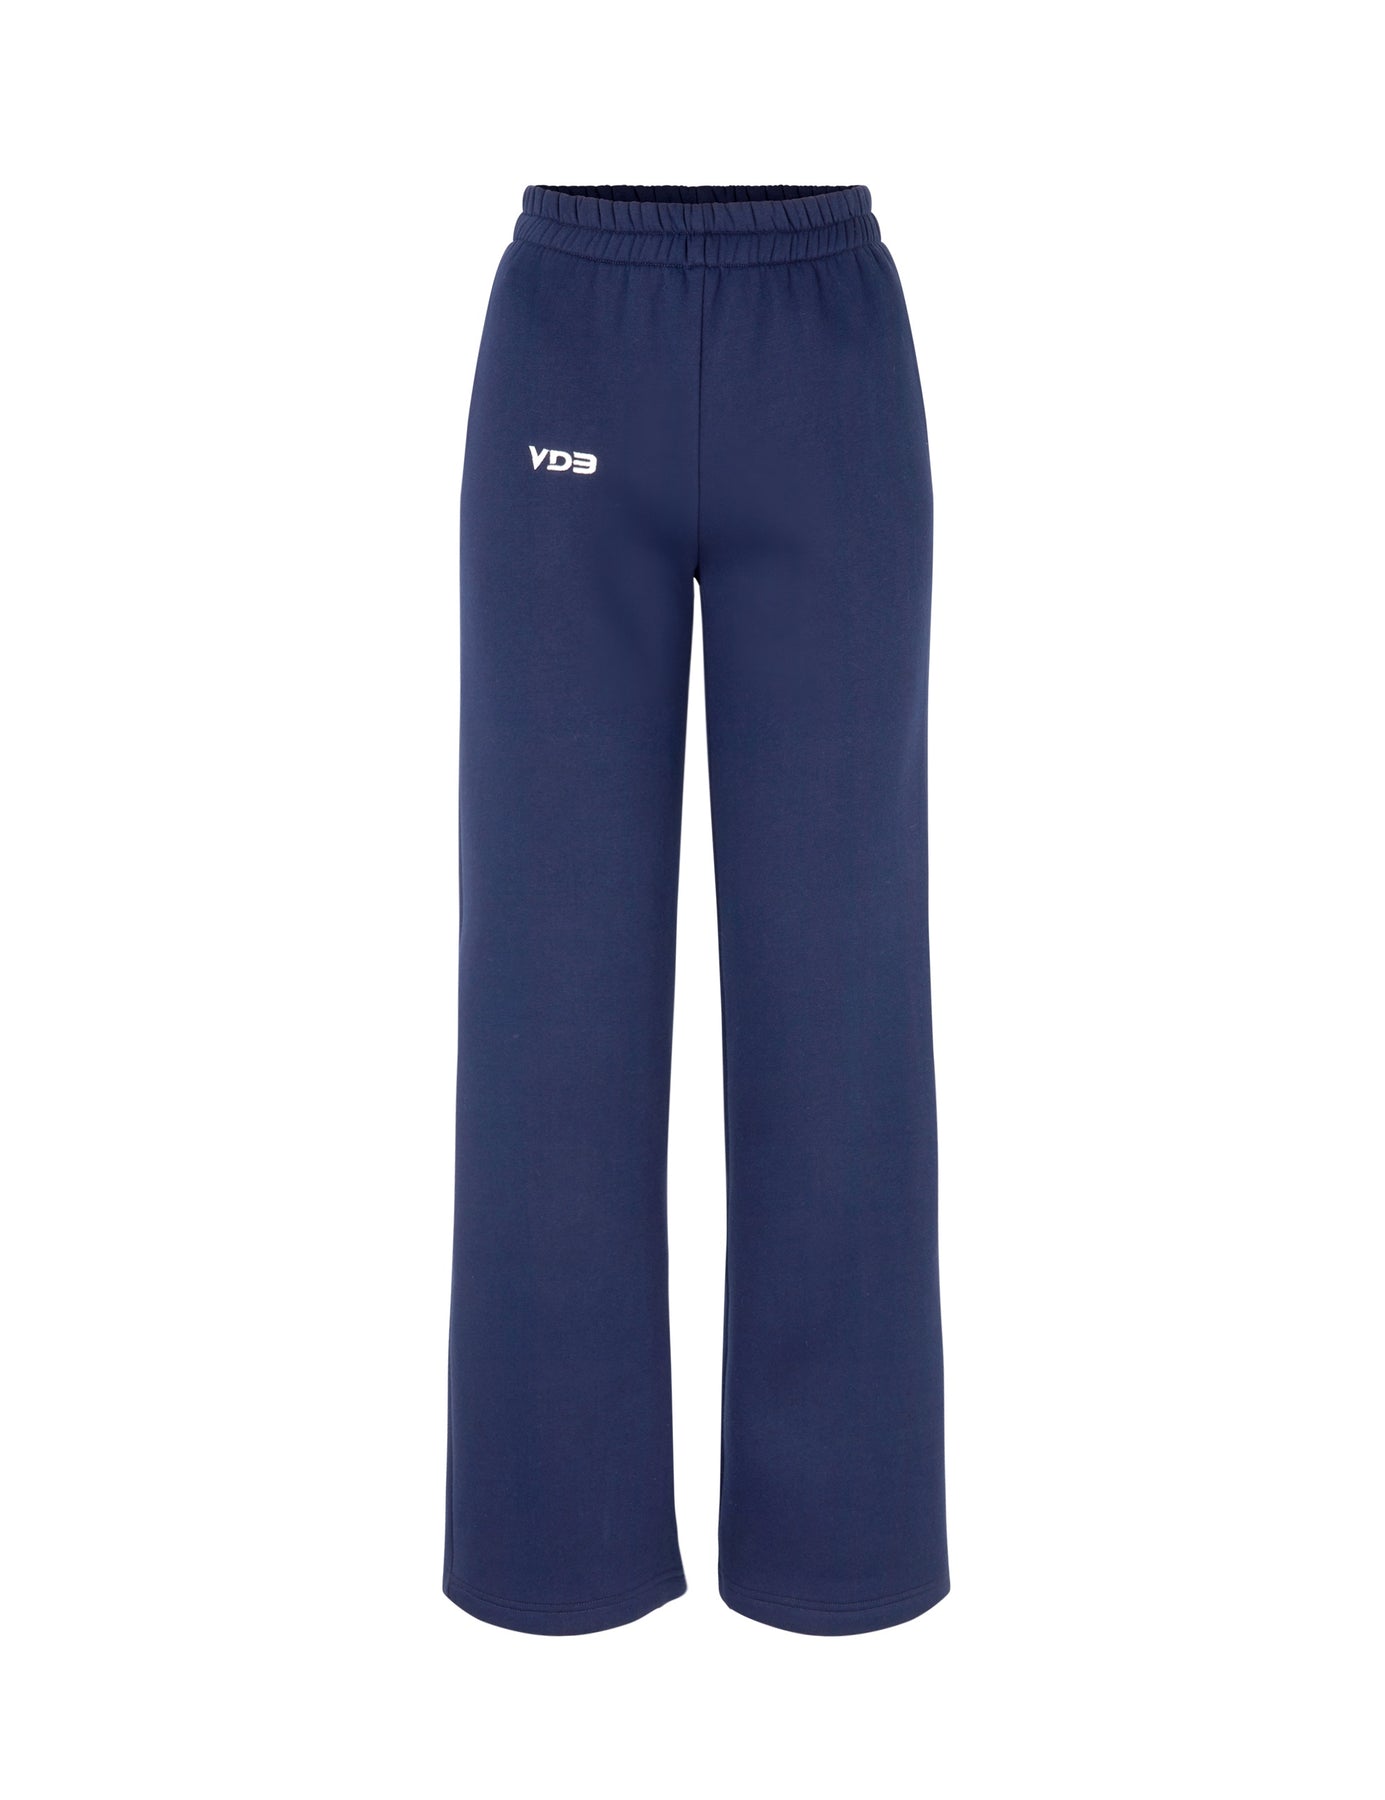 Sweatpants  Buy the popular joggers for women from VDB